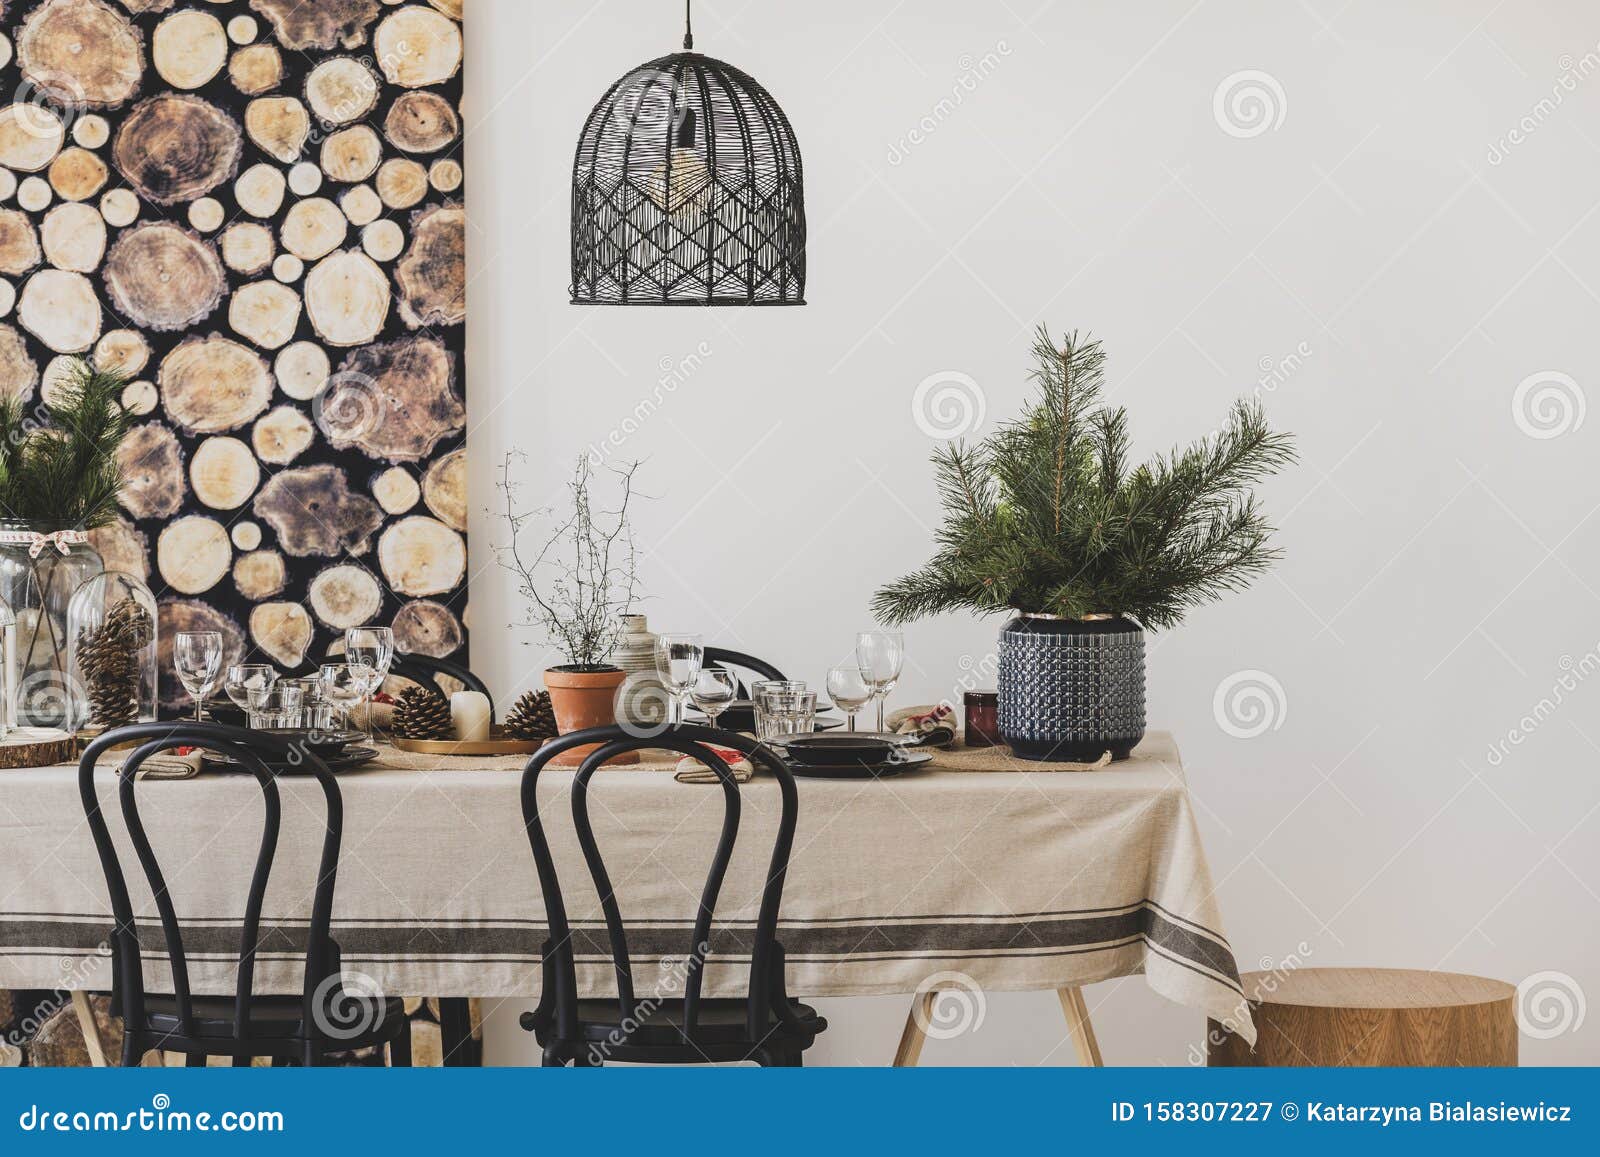 black chairs and pendant lamp in dining room